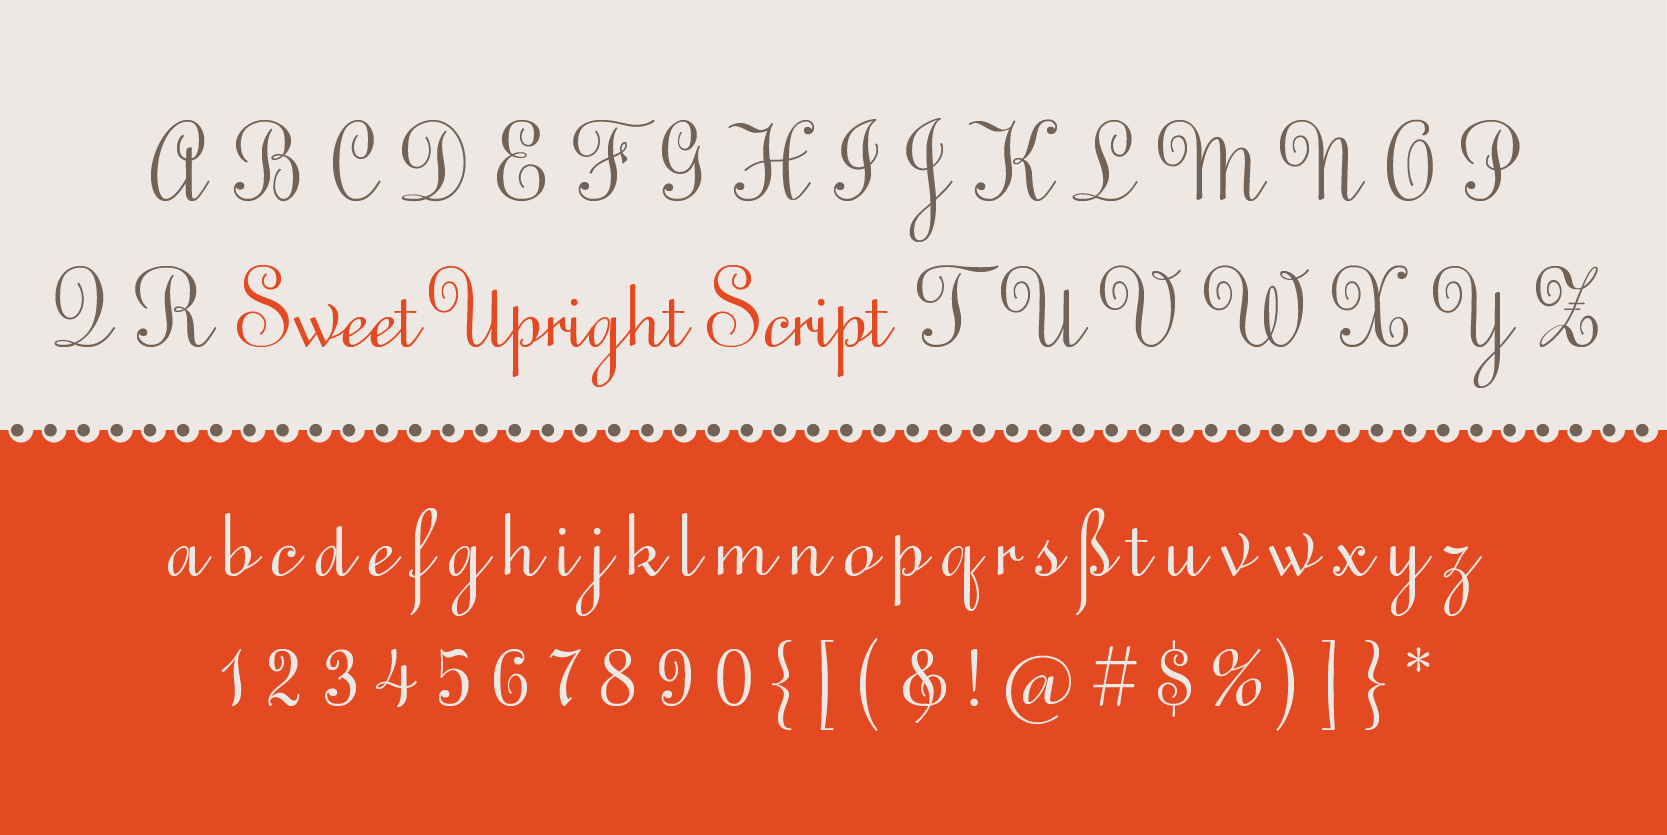 Card displaying Sweet Upright Script typeface in various styles